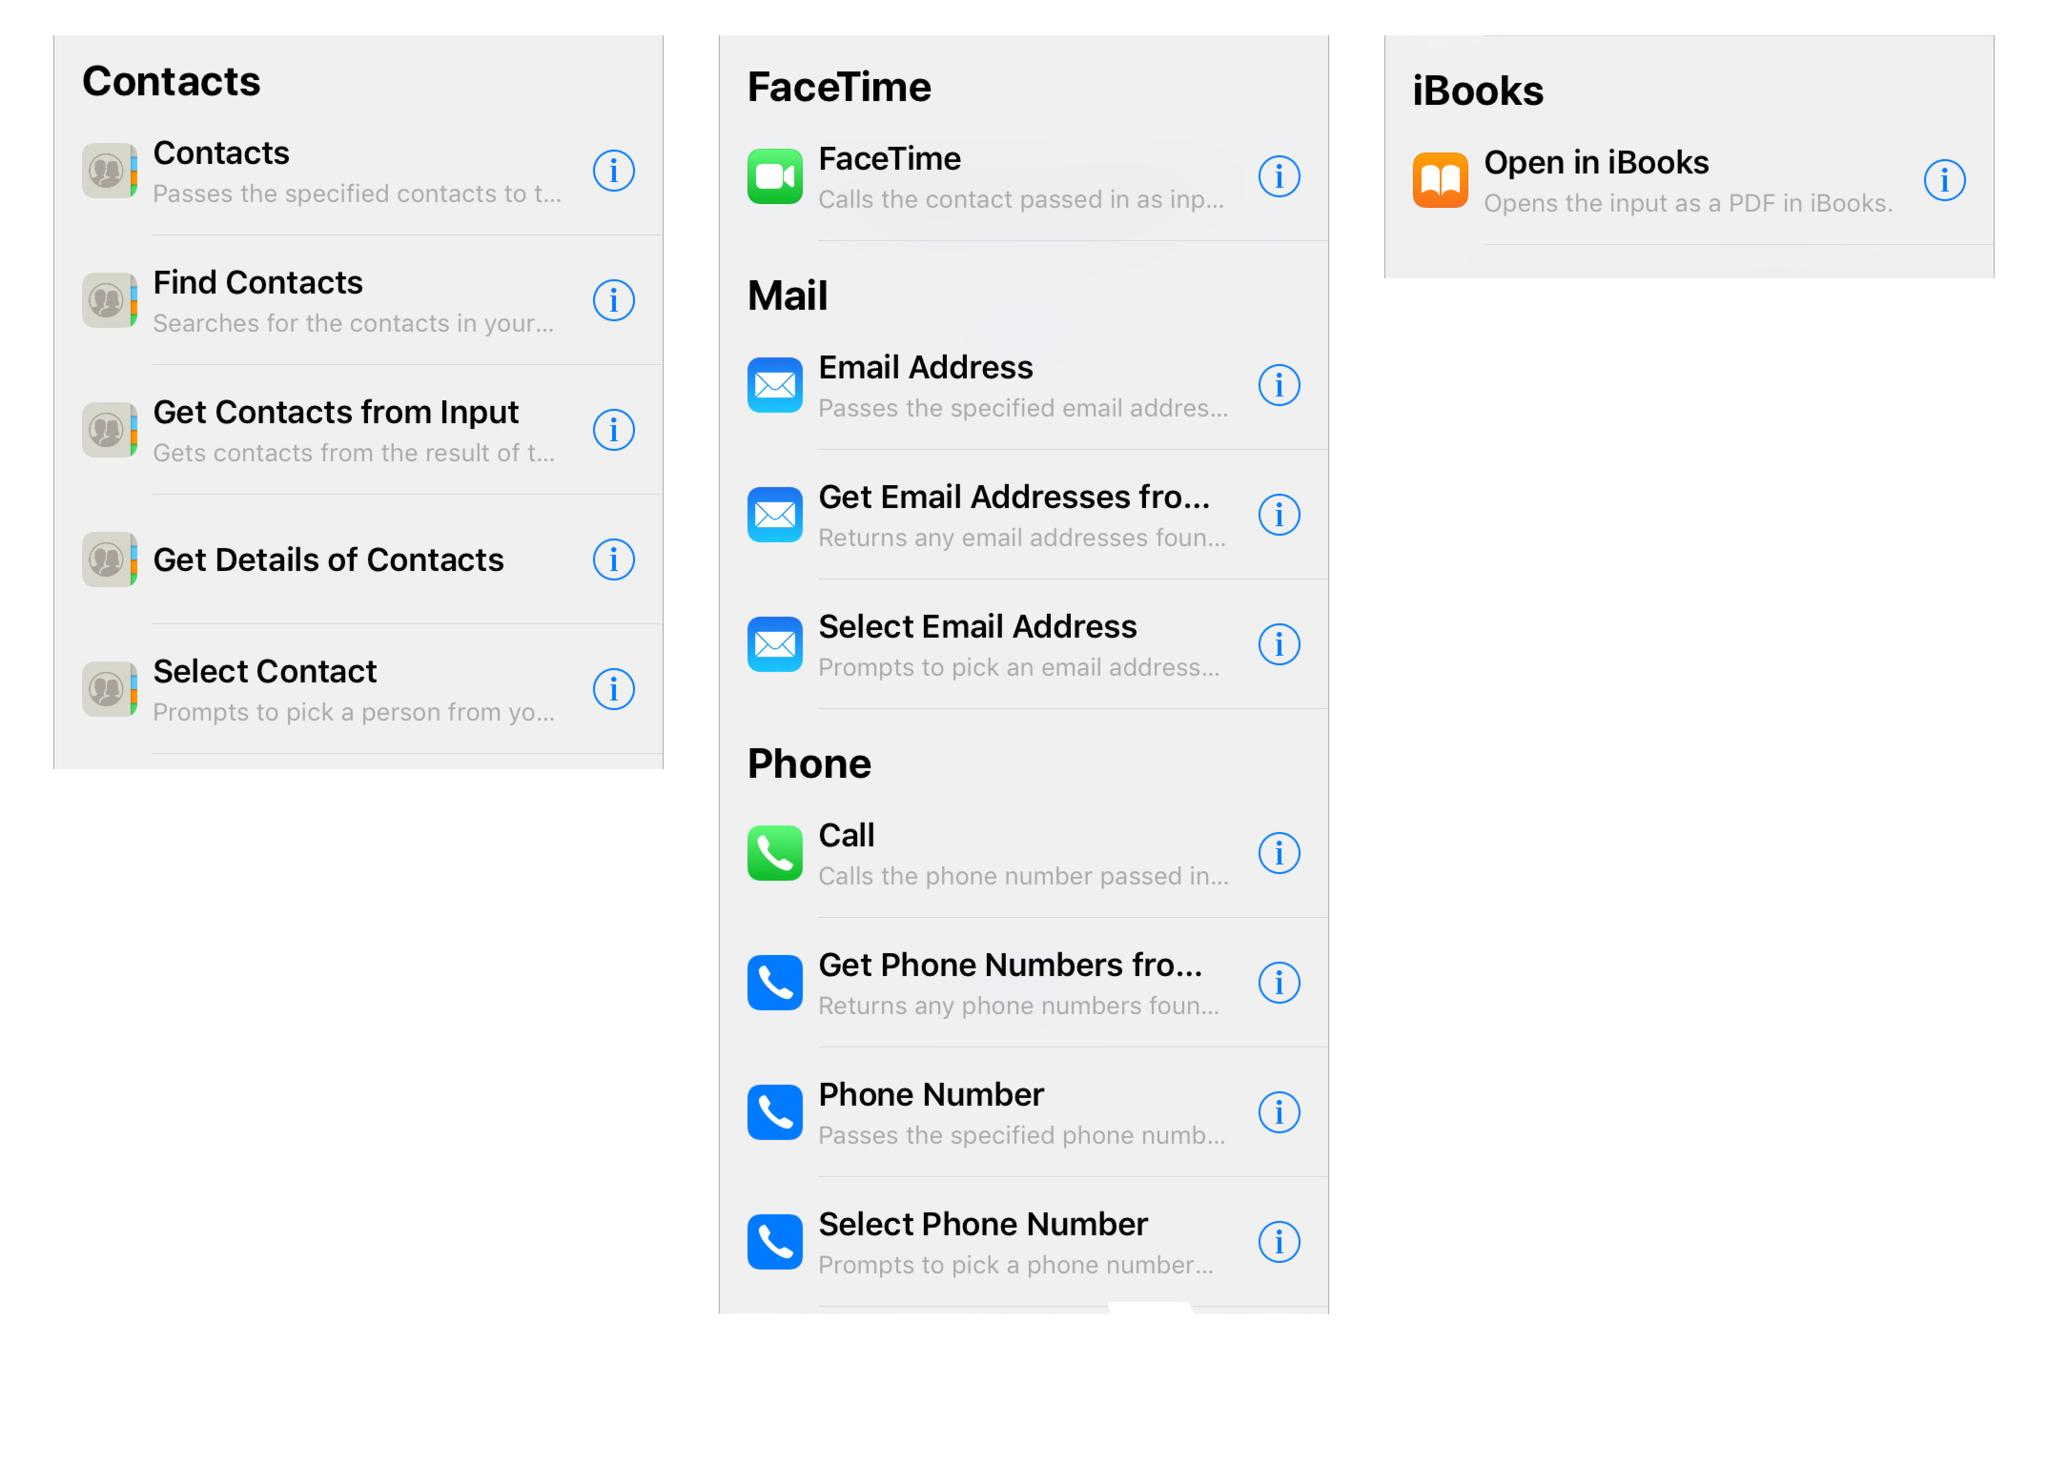 Image showing clipped screenshots of Shortcuts actions, including the Contacts and Messaging categories